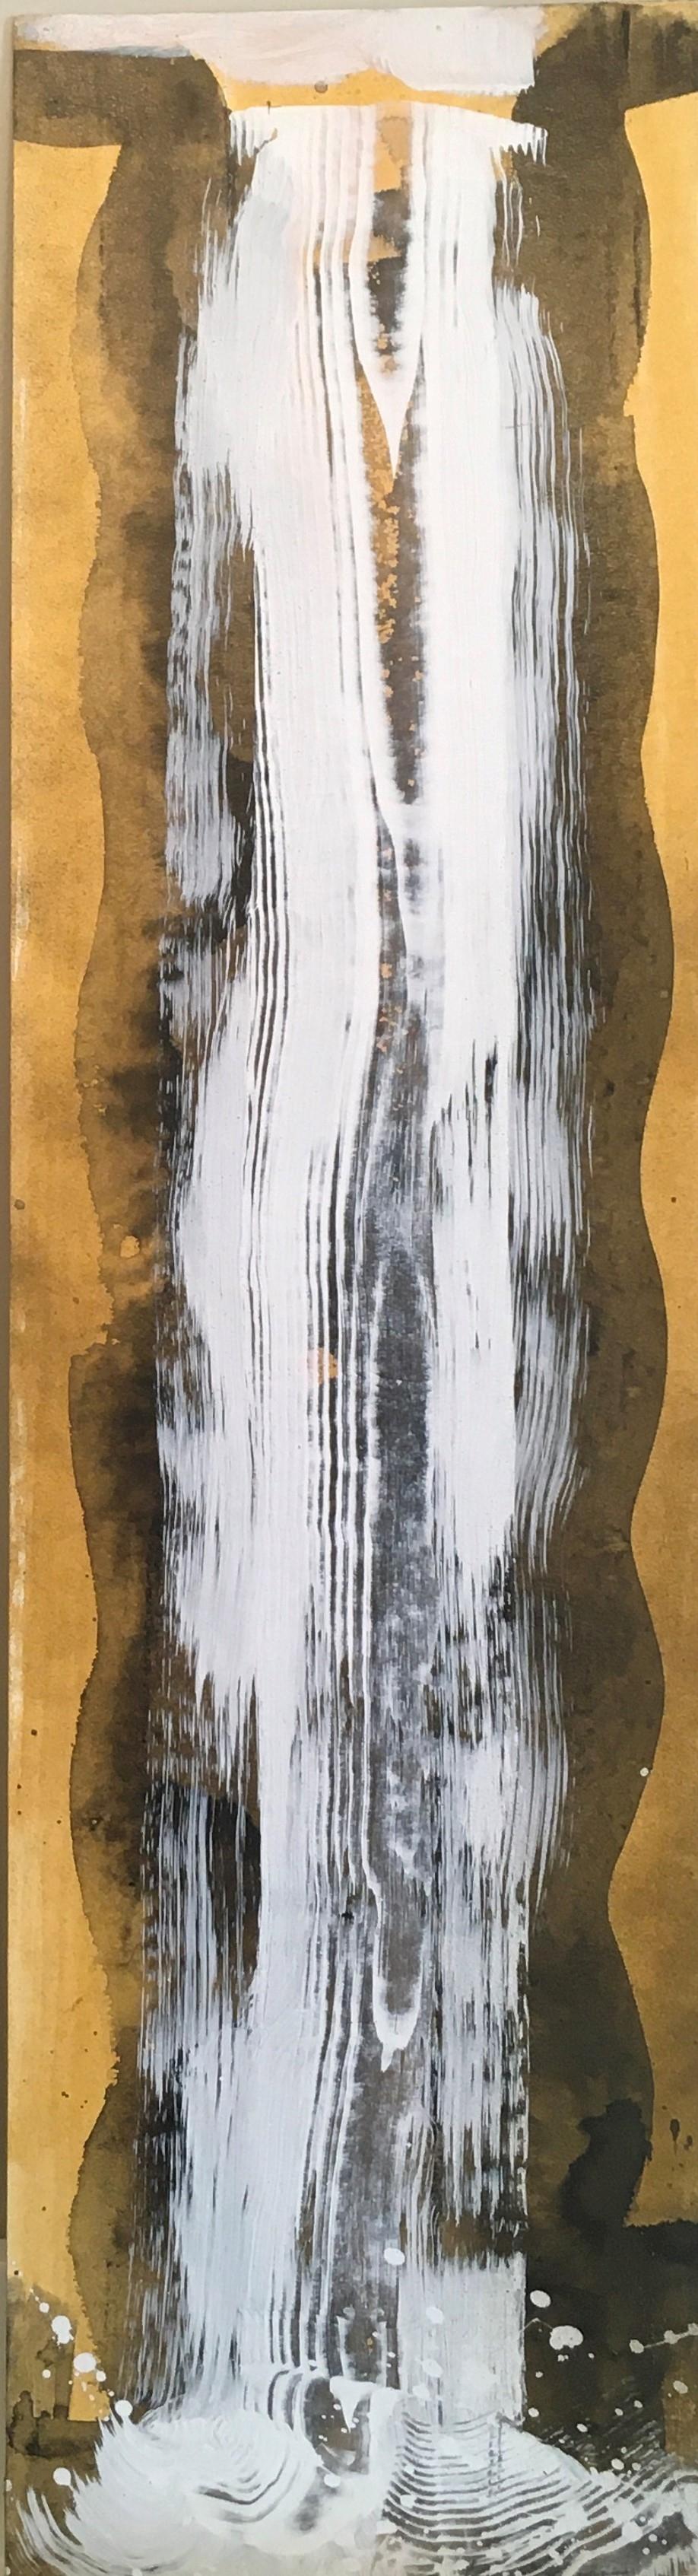 Waterfall Duet 2, Water, Gold, White, Flowing, Acrylic, Oil, Painting, unframed